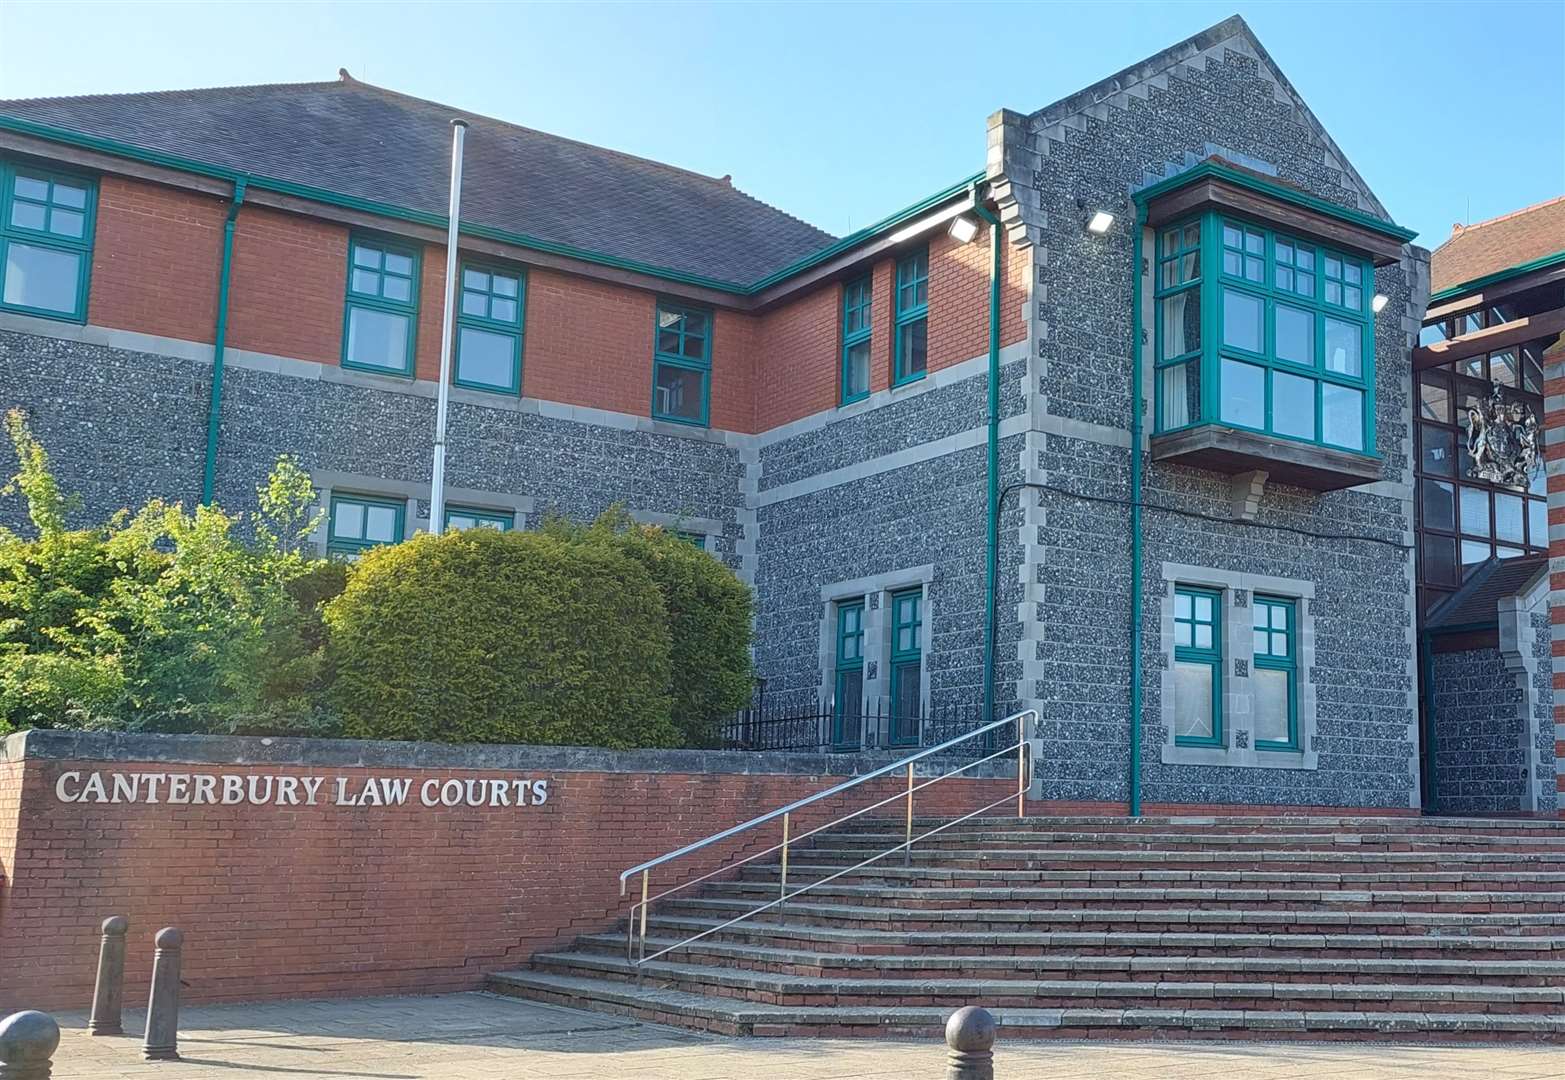 Michael Humphery-Smith was sentenced at Canterbury Crown Court